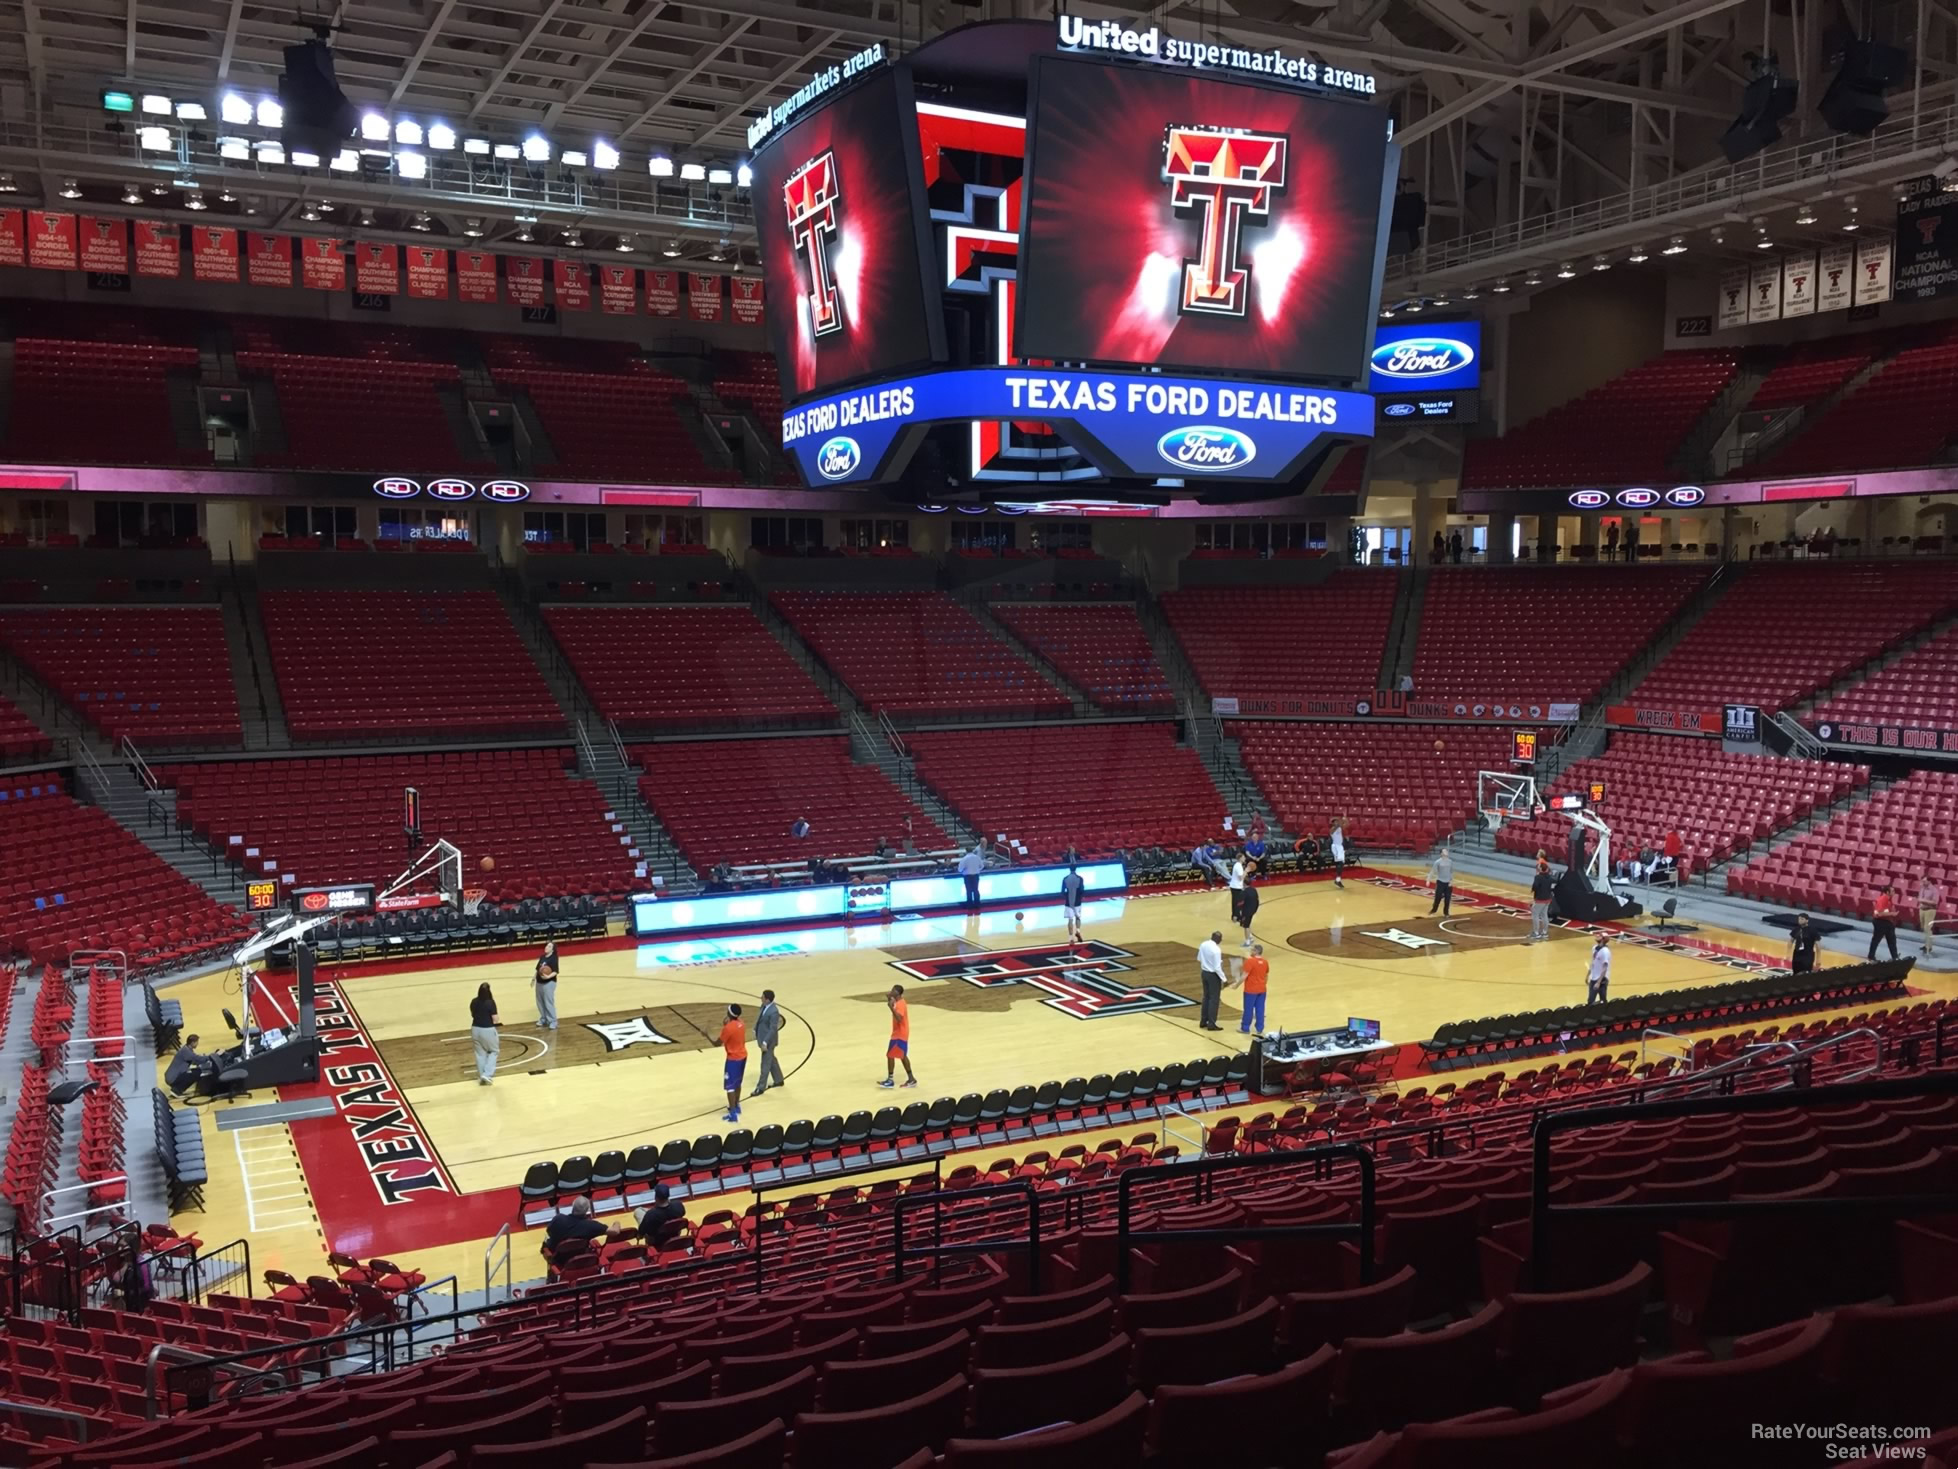 section 103, row 25 seat view  - united supermarkets arena